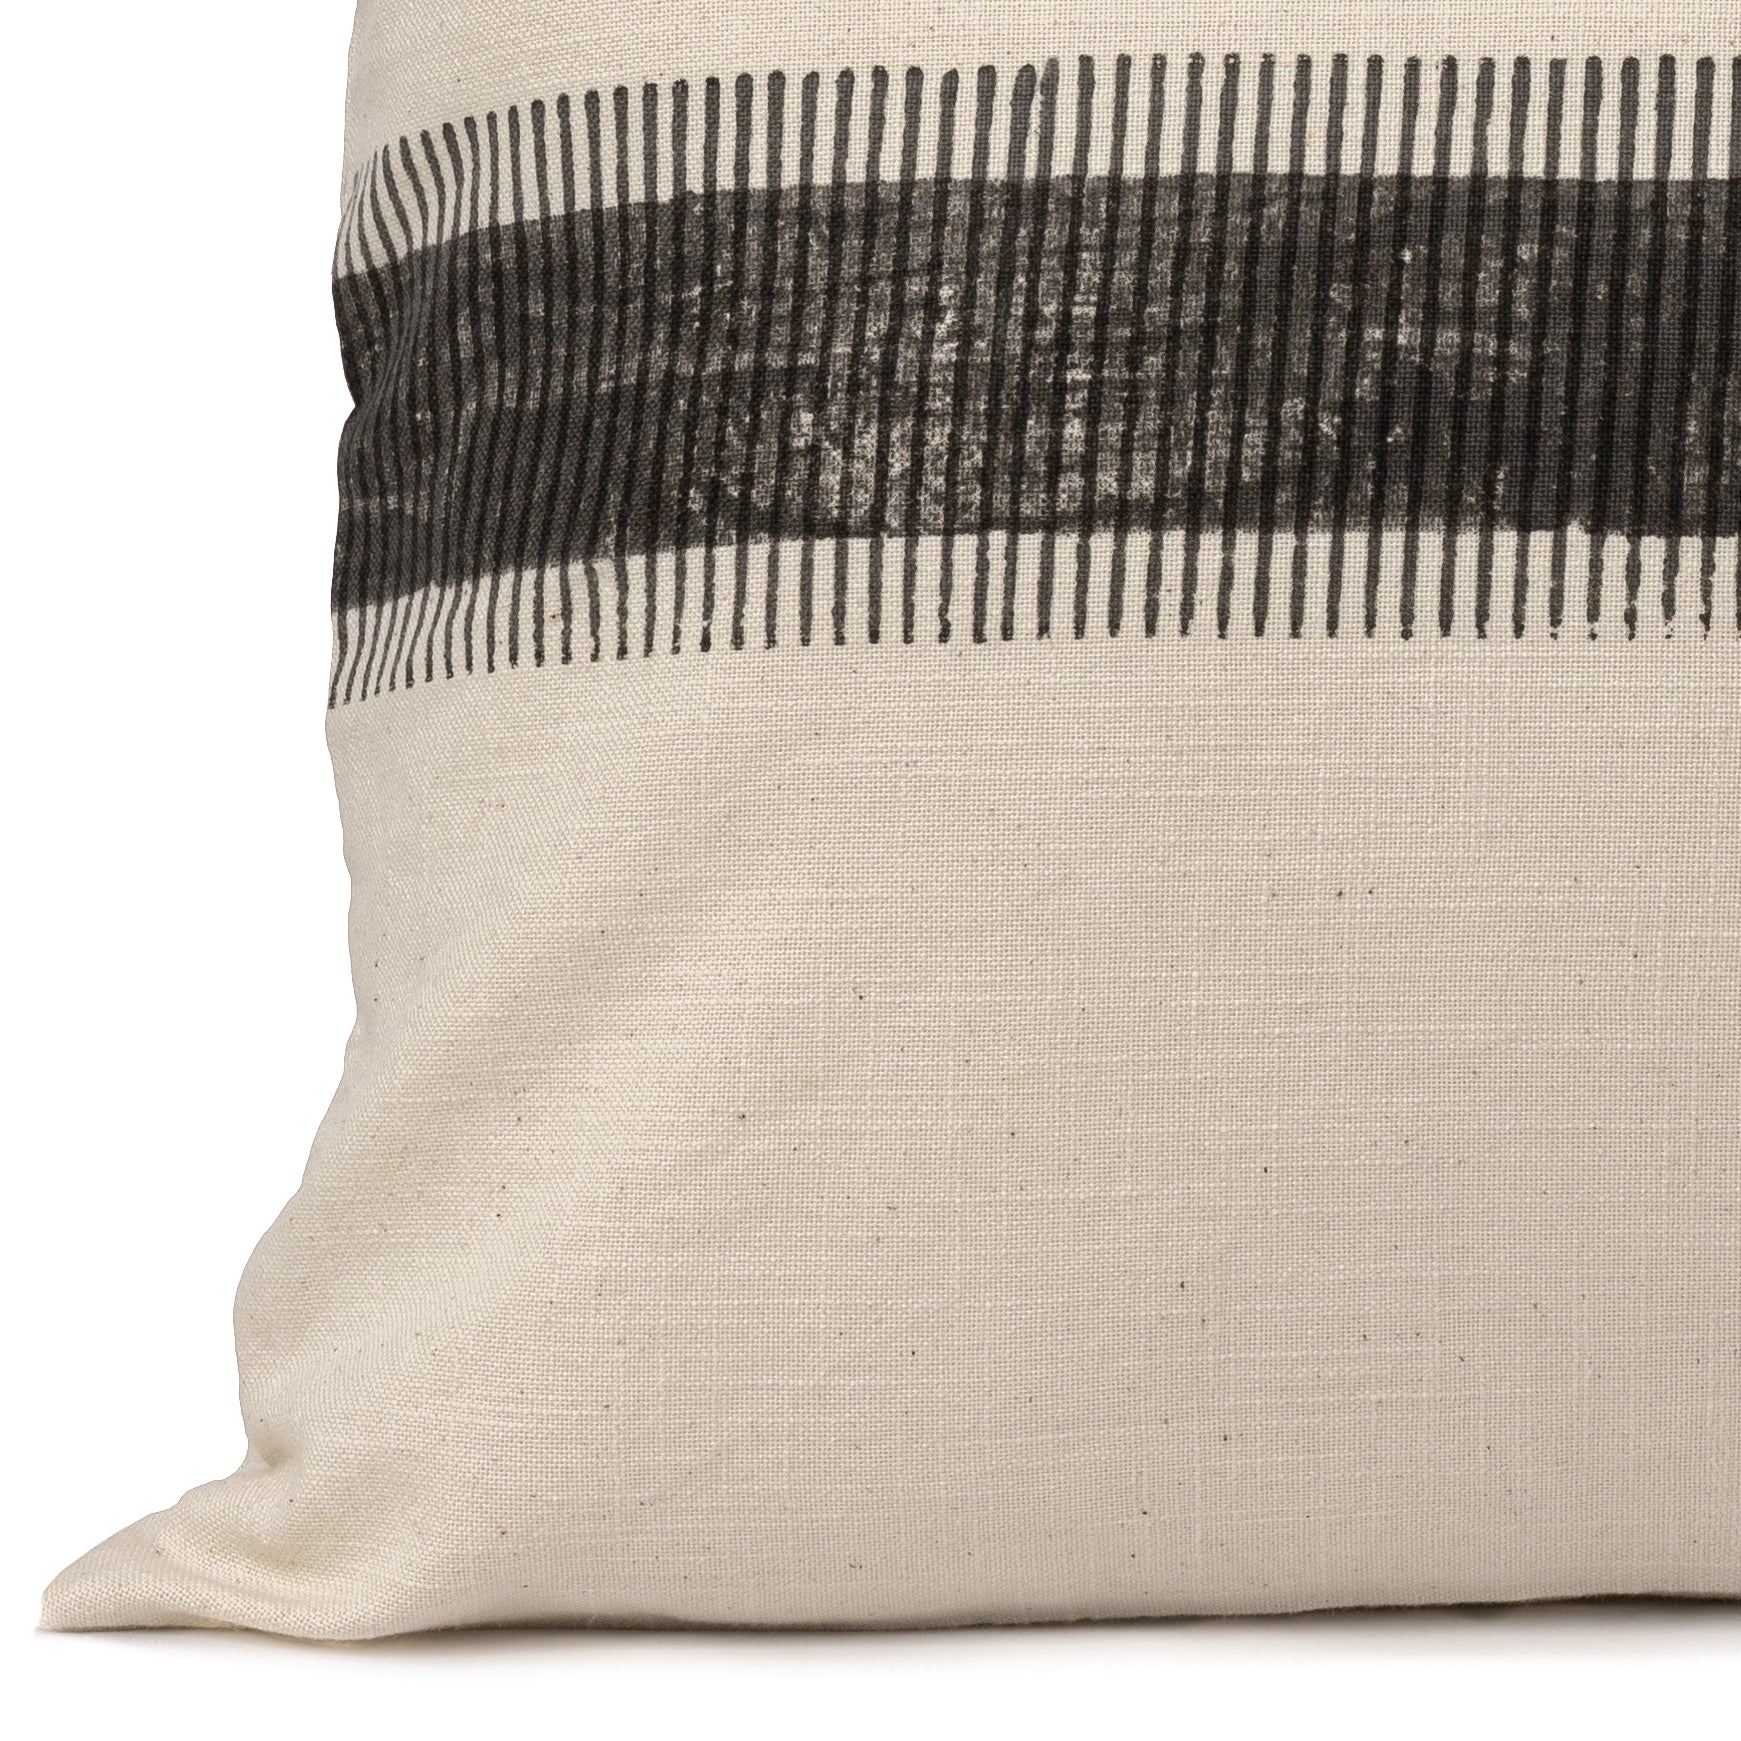 Close up of the charcoal block printed design that runs across the lumbar cotton cushion cover